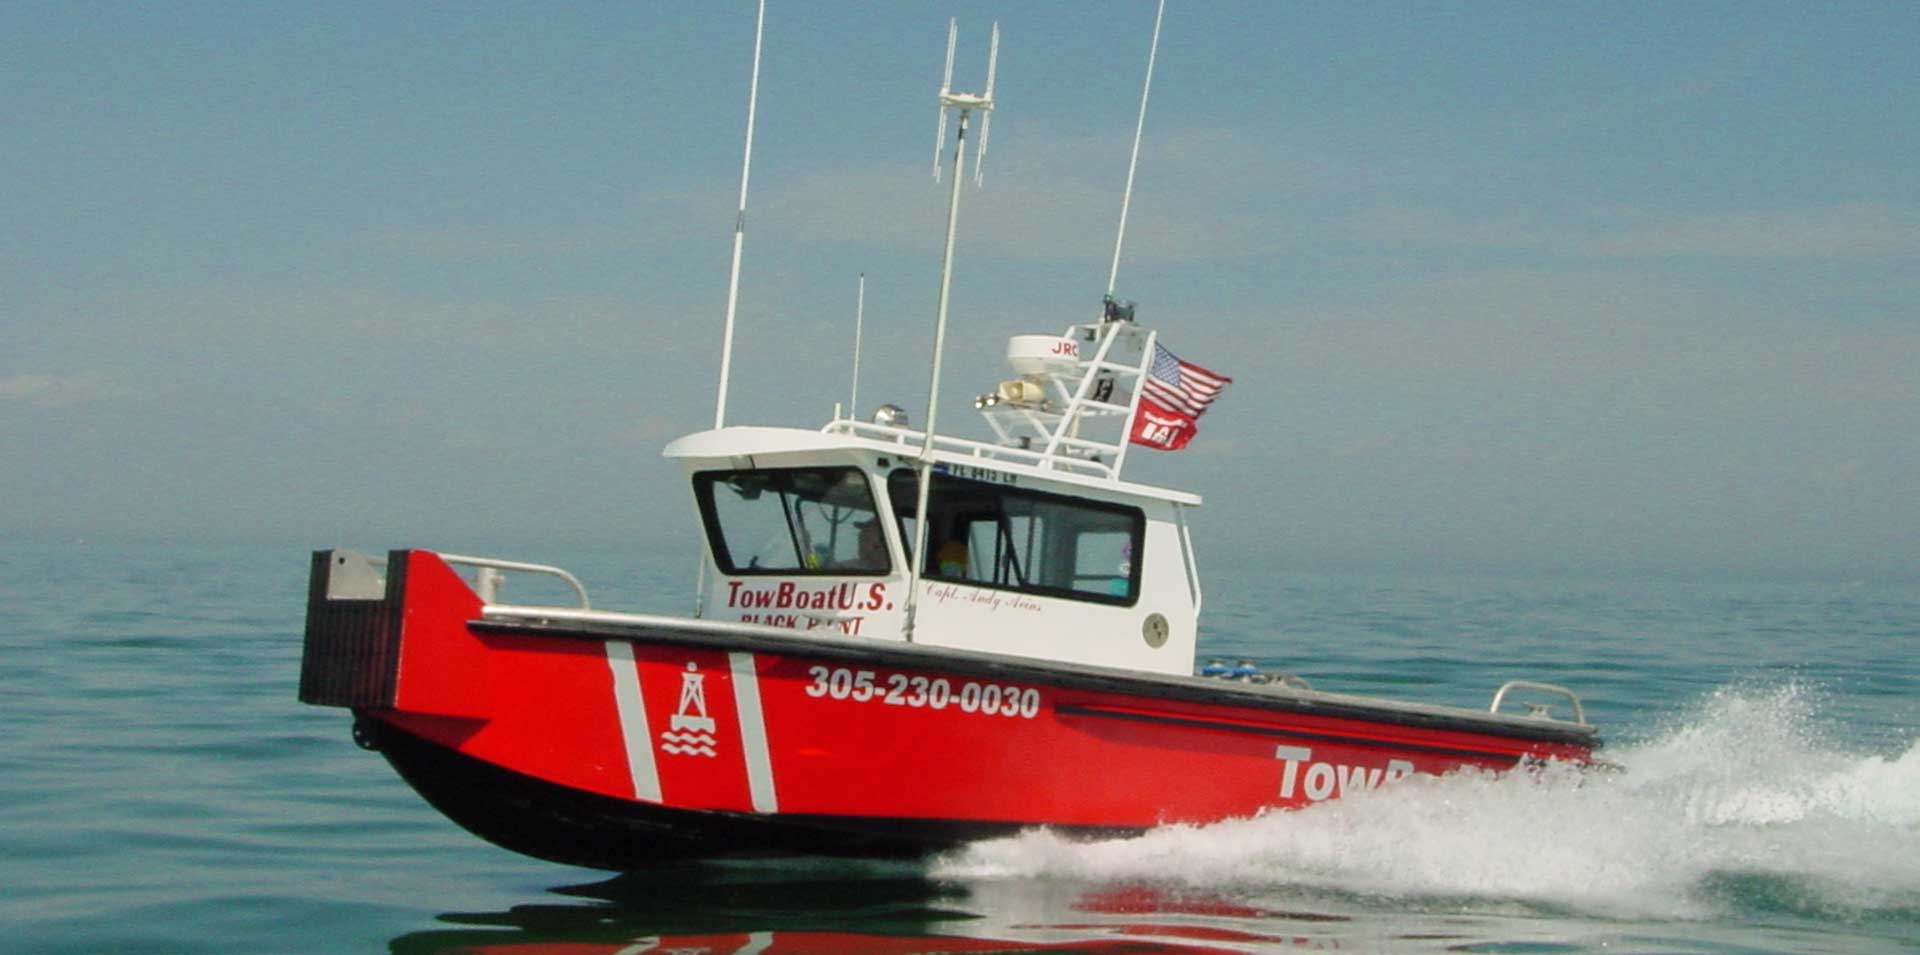 Marine Towing | Tow Boat U.S. Black Point